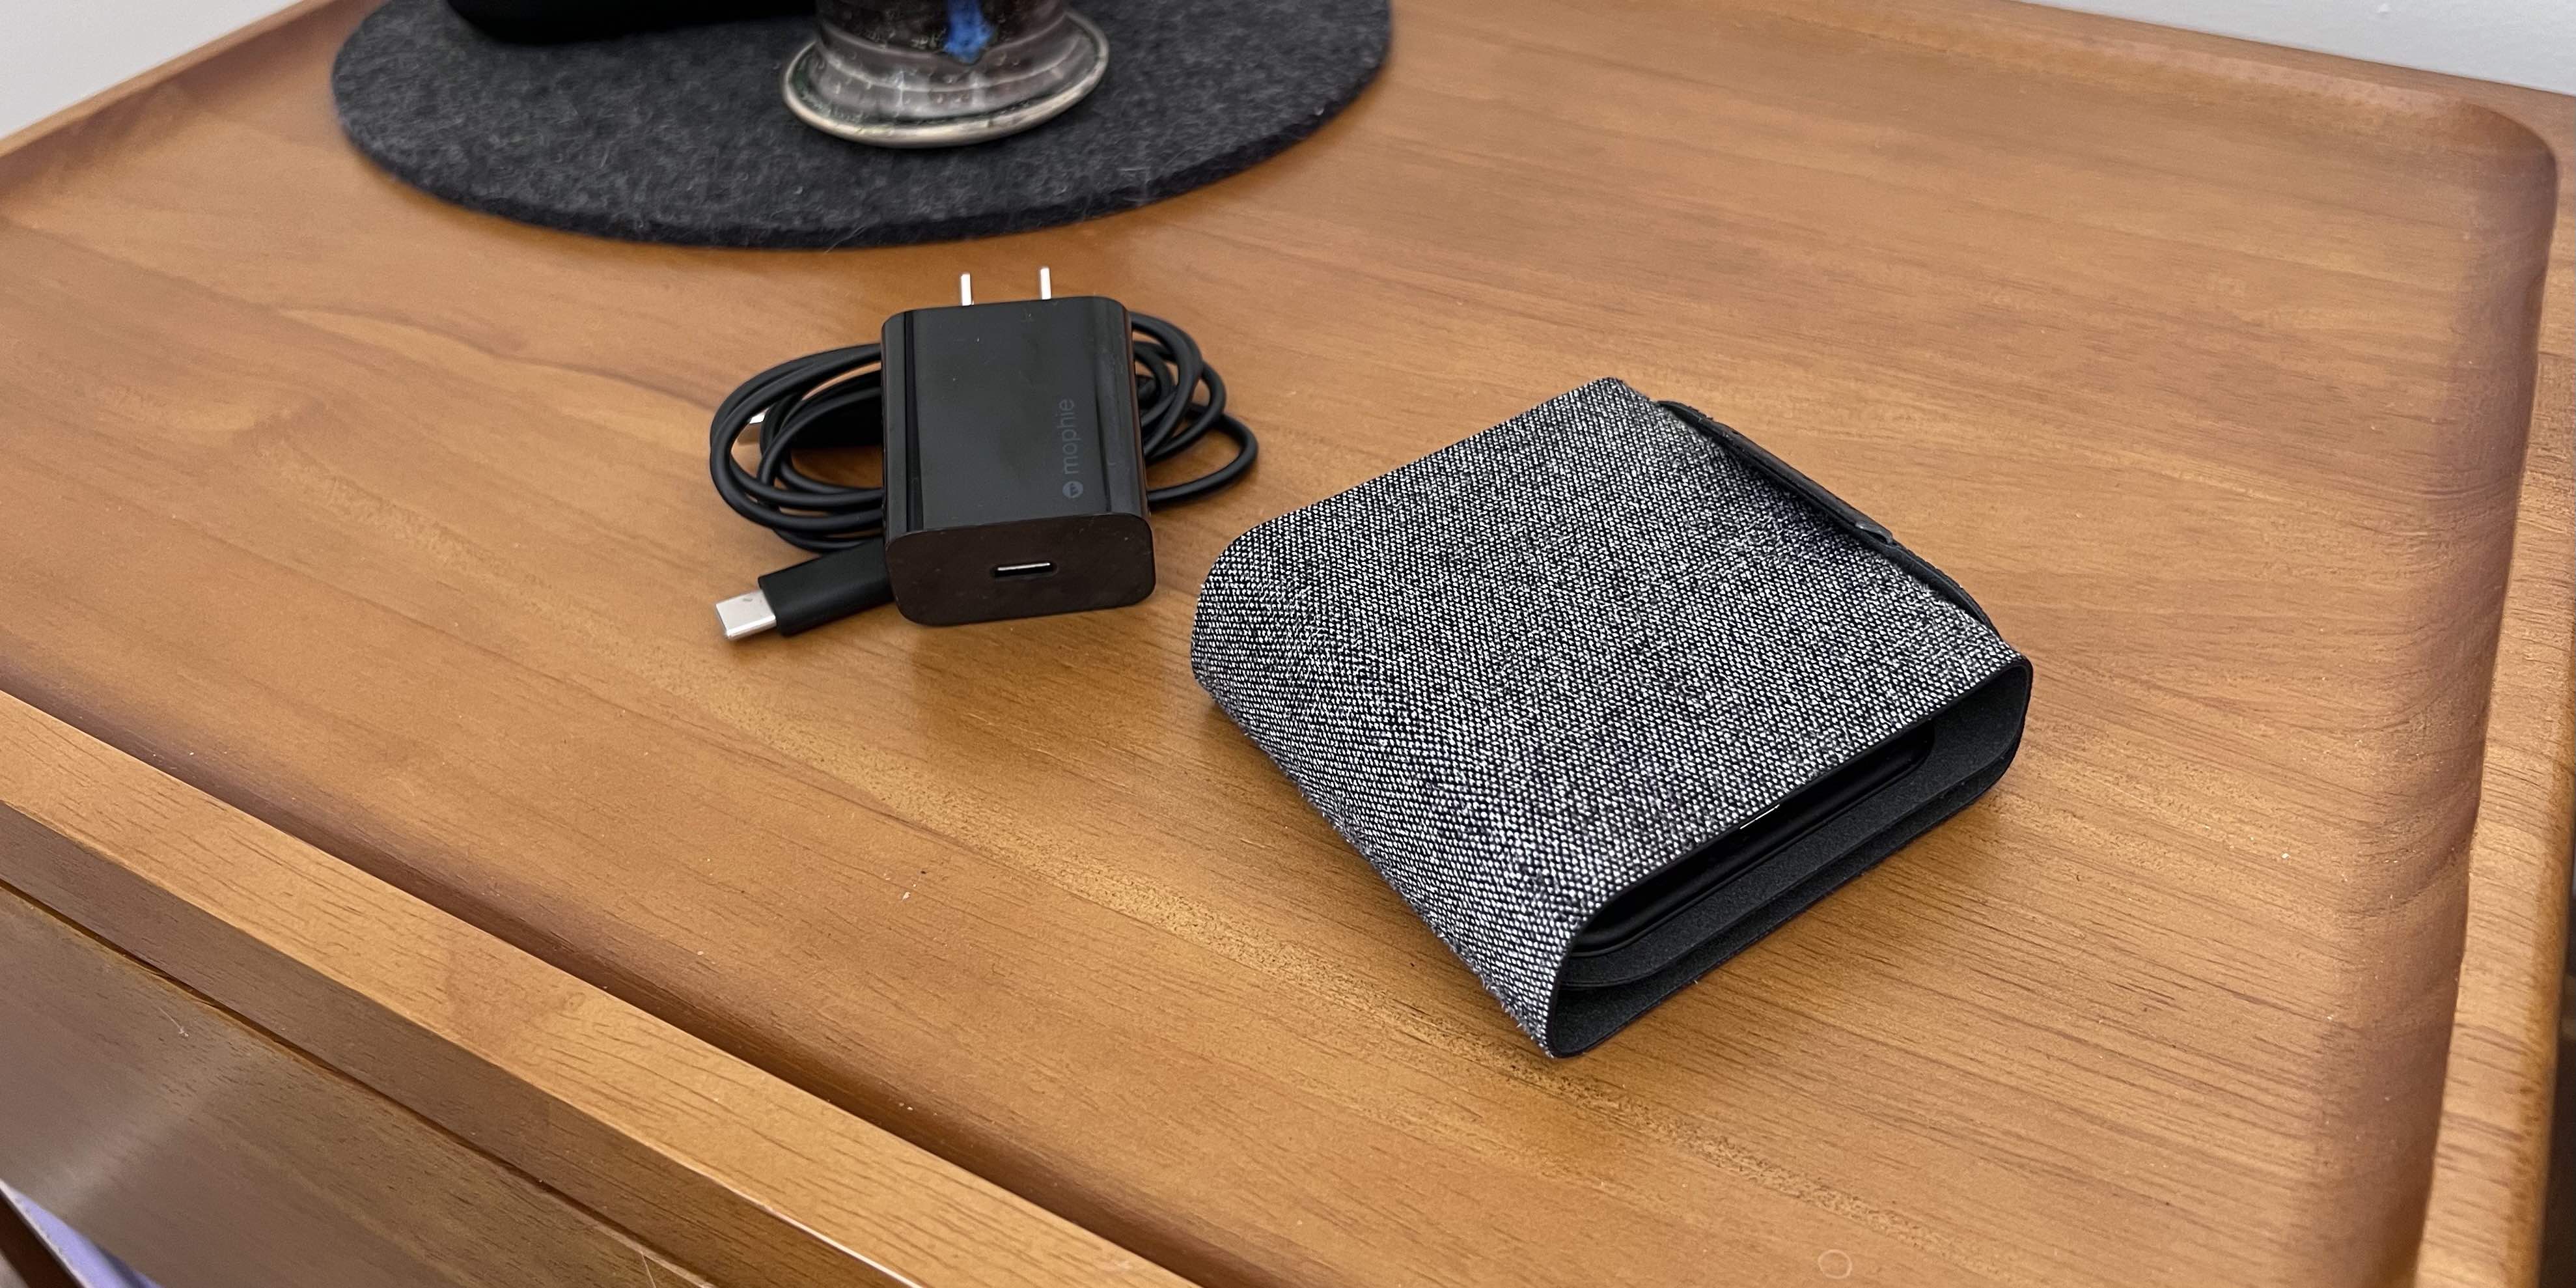 Best iPhone travel charger - mophie 3-in-1 - unboxed